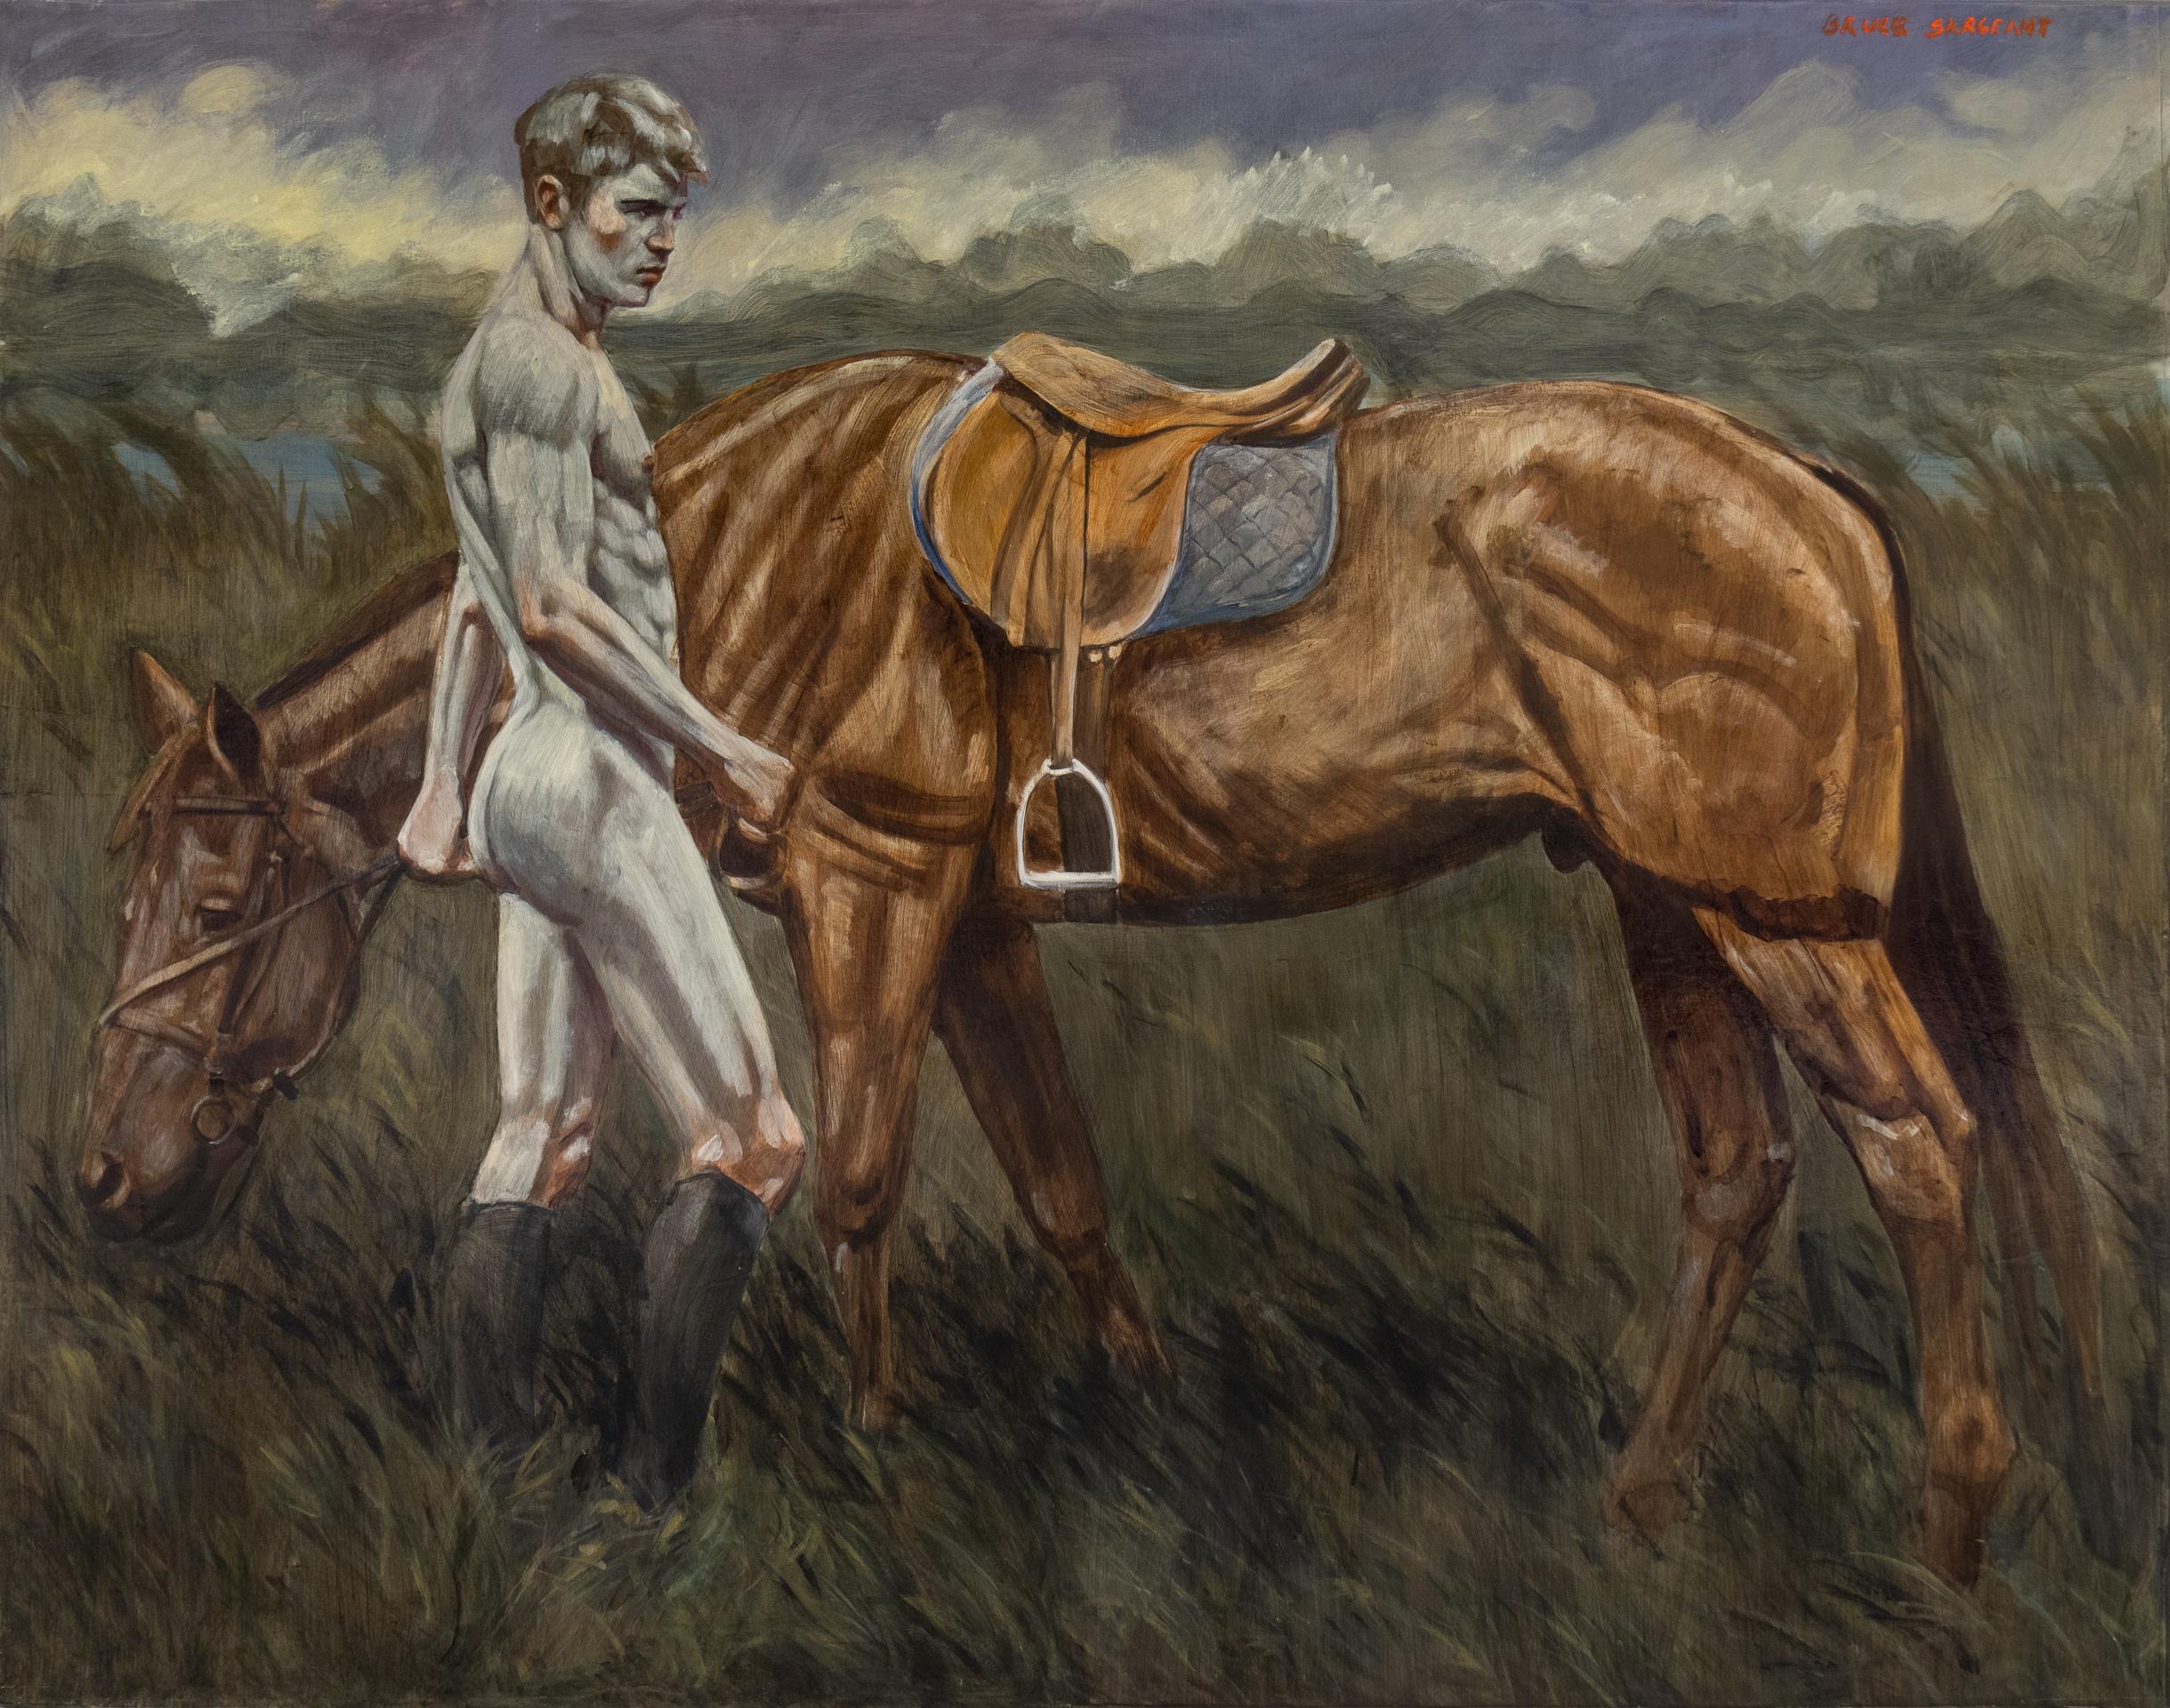 Mark Beard Figurative Painting - [Bruce Sargeant (1898-1938)] Nude Man with Horse